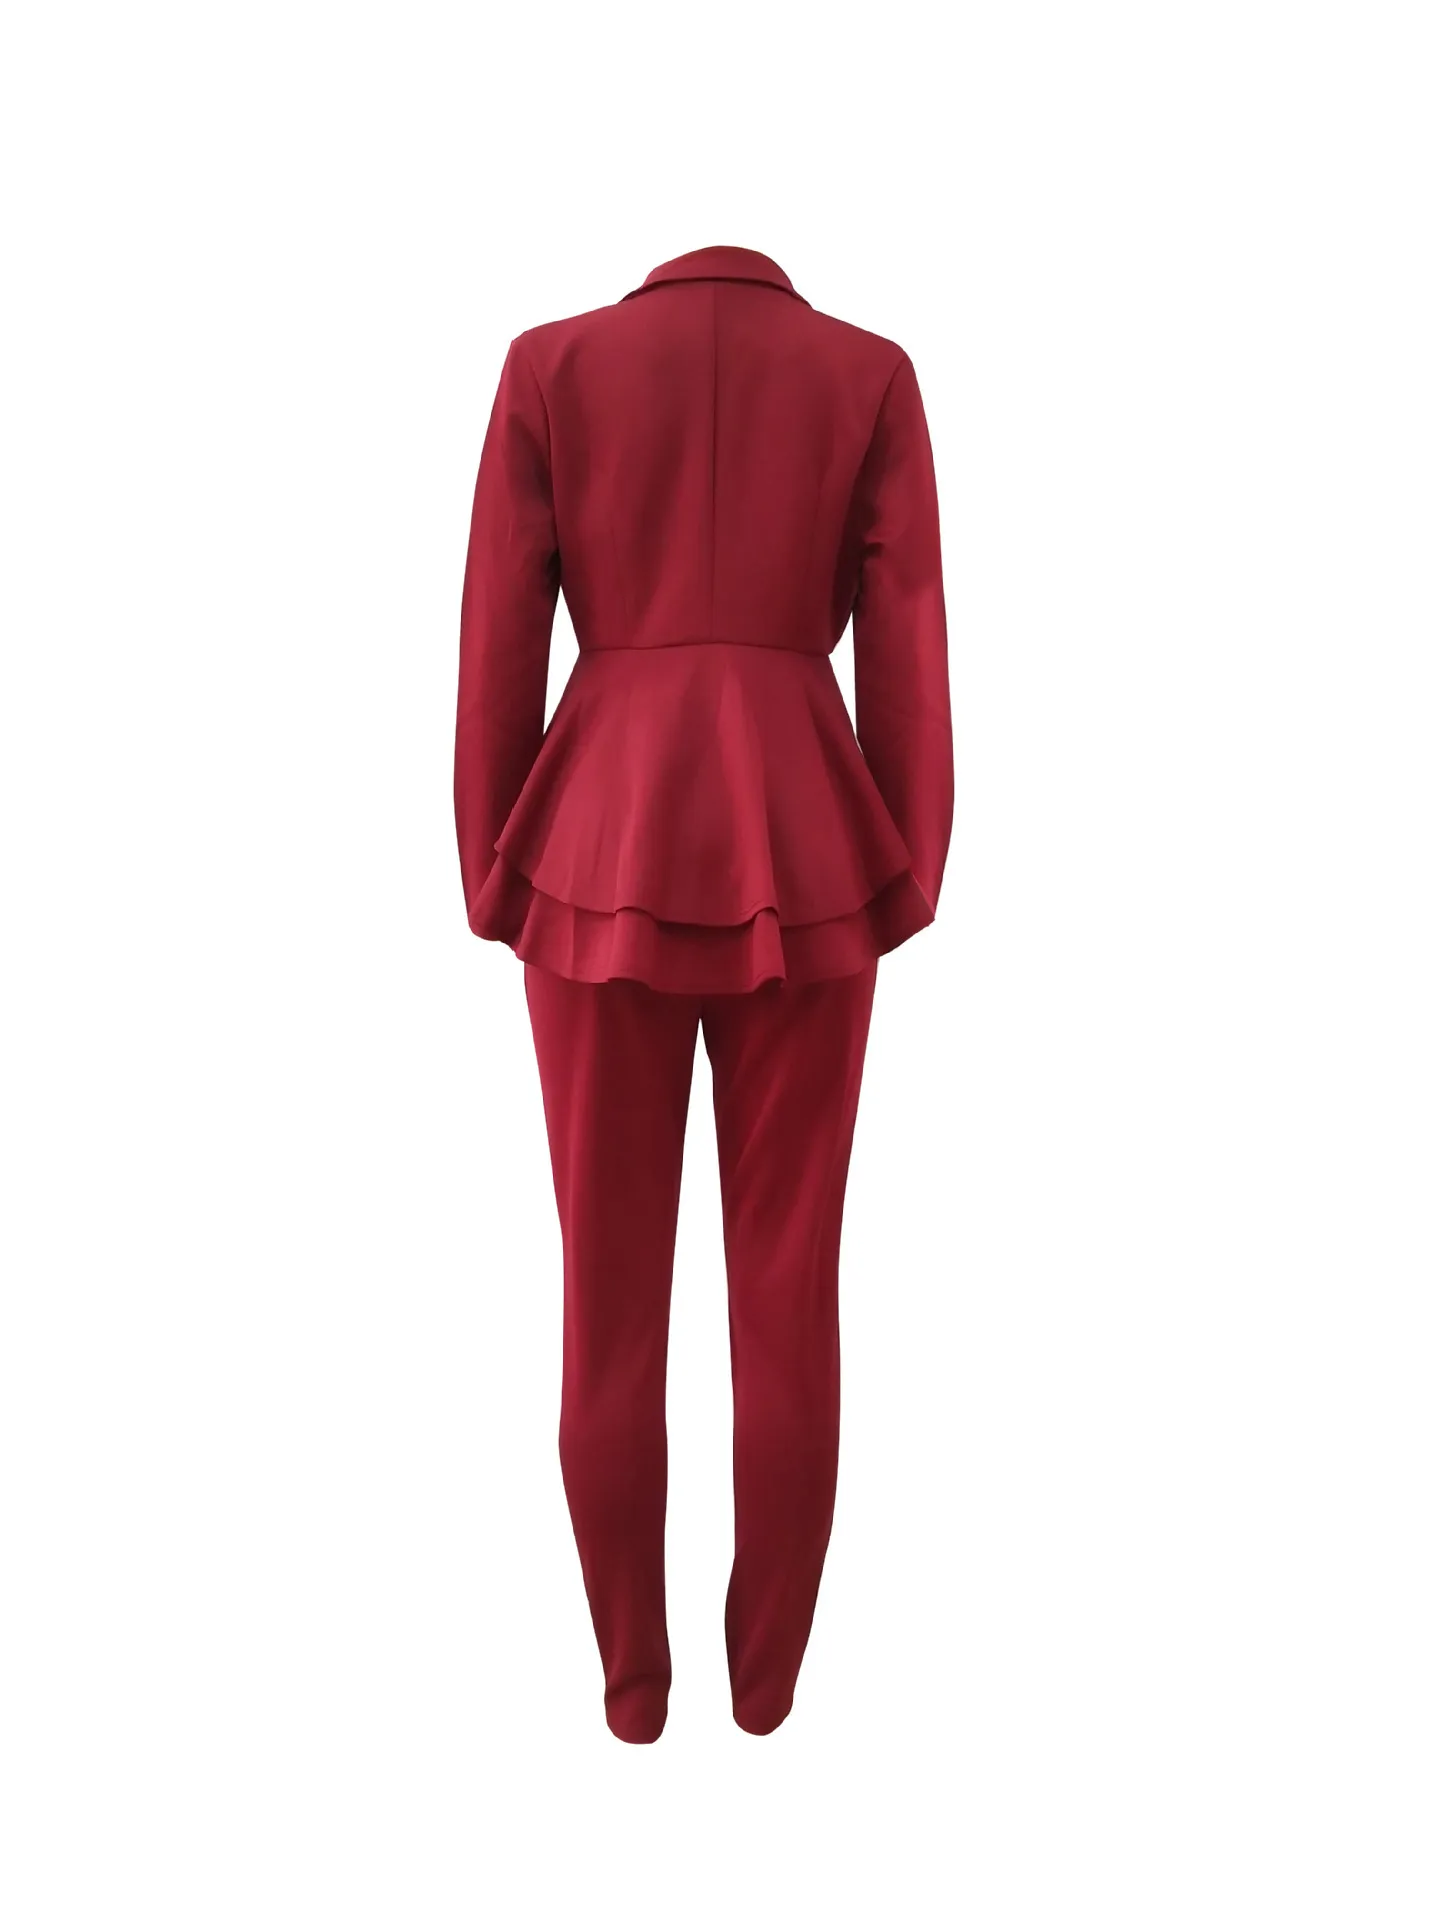 Sexy Two Piece Sets for Women Blue V Neck Long Sleeve Peplum tops and Full Length Pants Wine Red Black Office Ladies Work Wear 210416